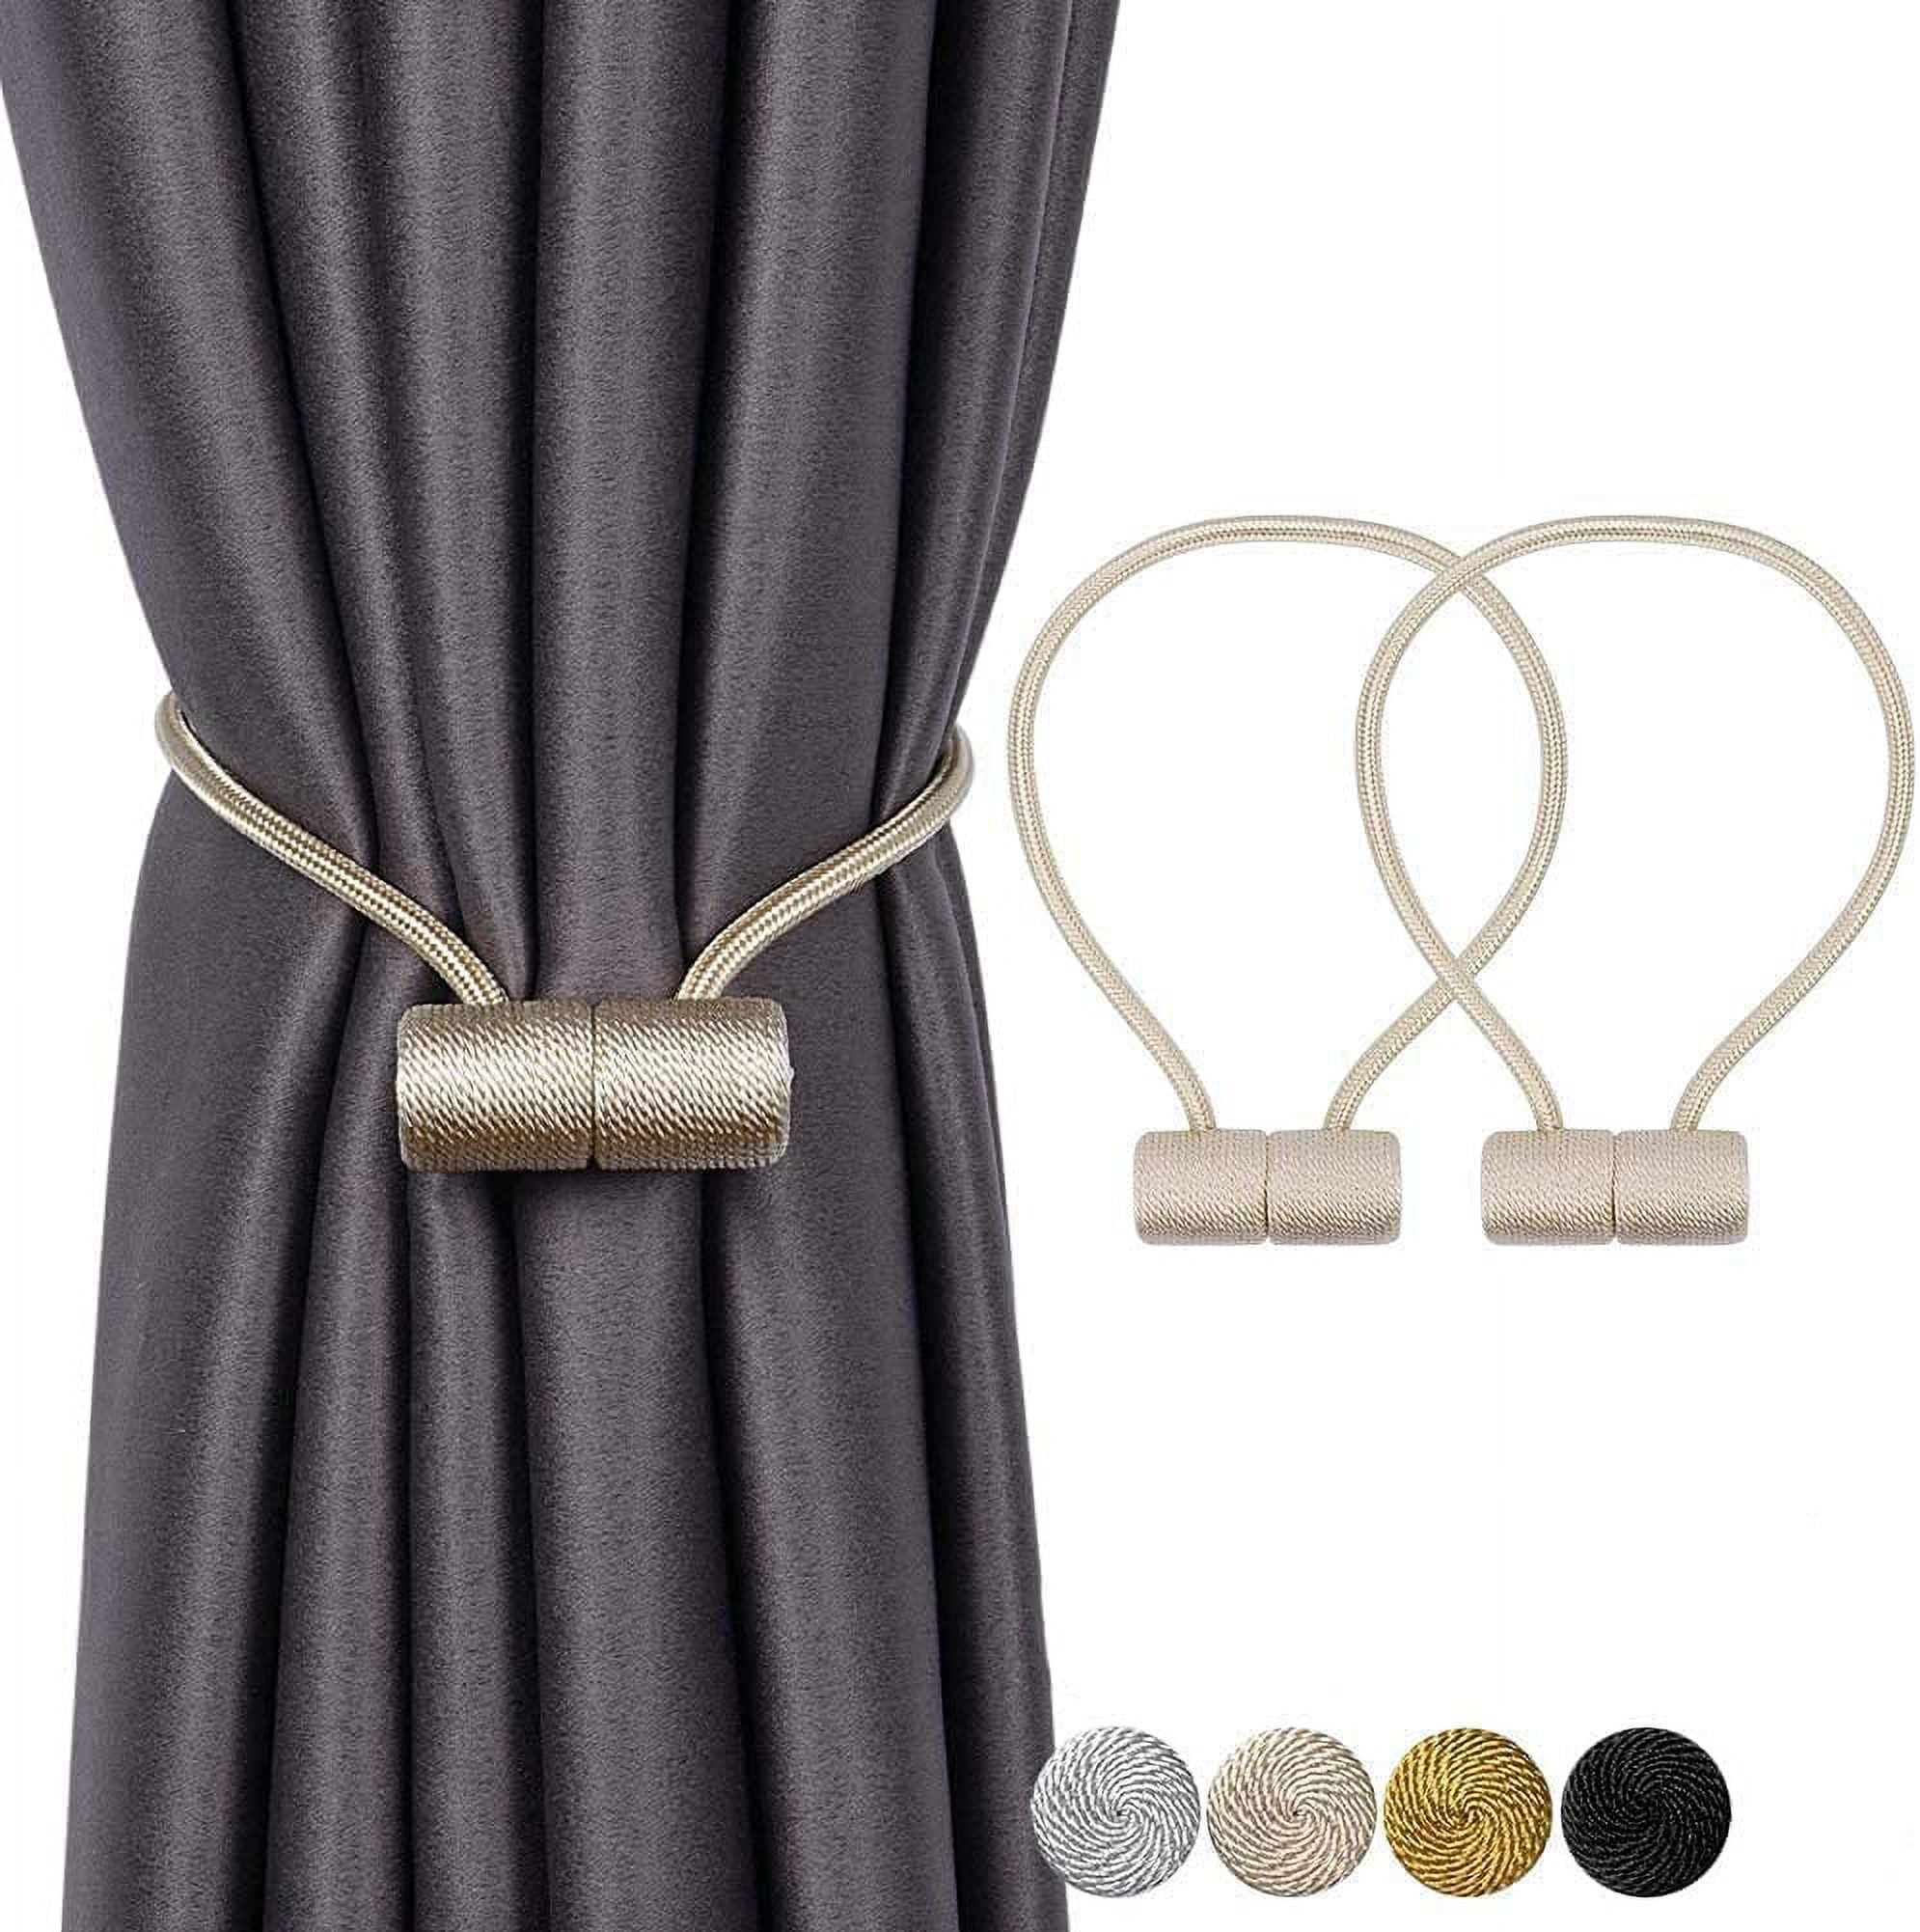 Magnetic Curtain Holders, Magnetic Clips and Tie Backs, Housewarming Gift,  Curtain Tiebacks, Curtain Pulls, Silver 20cm pack of 2 